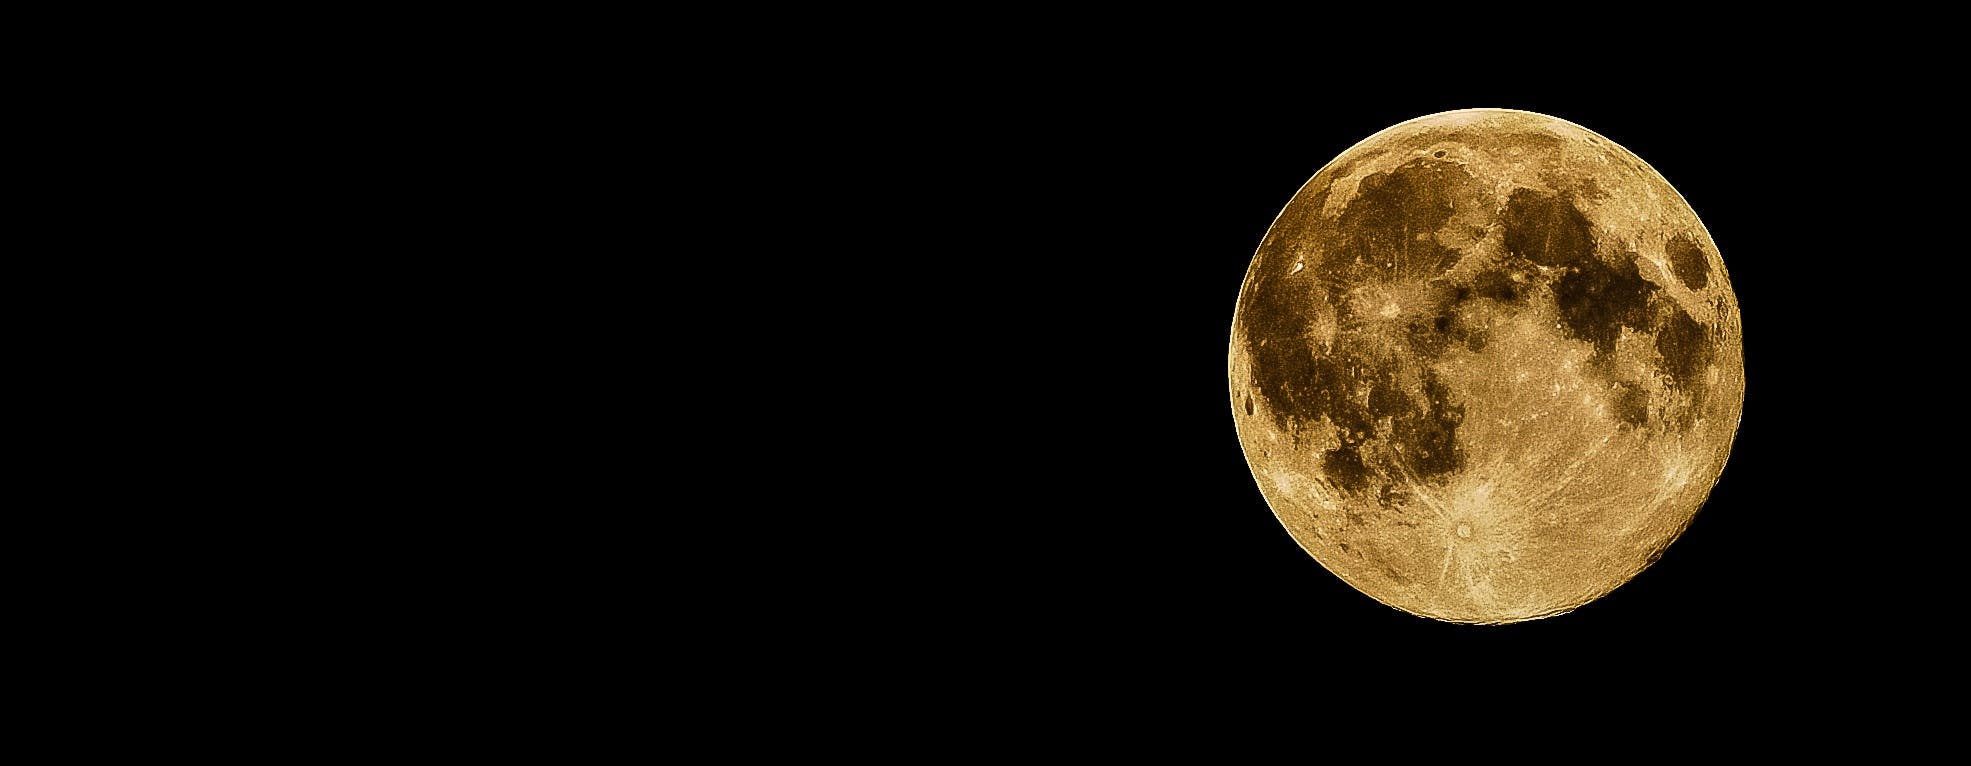 Full Moon Photos, Download The BEST Free Full Moon Stock Photos